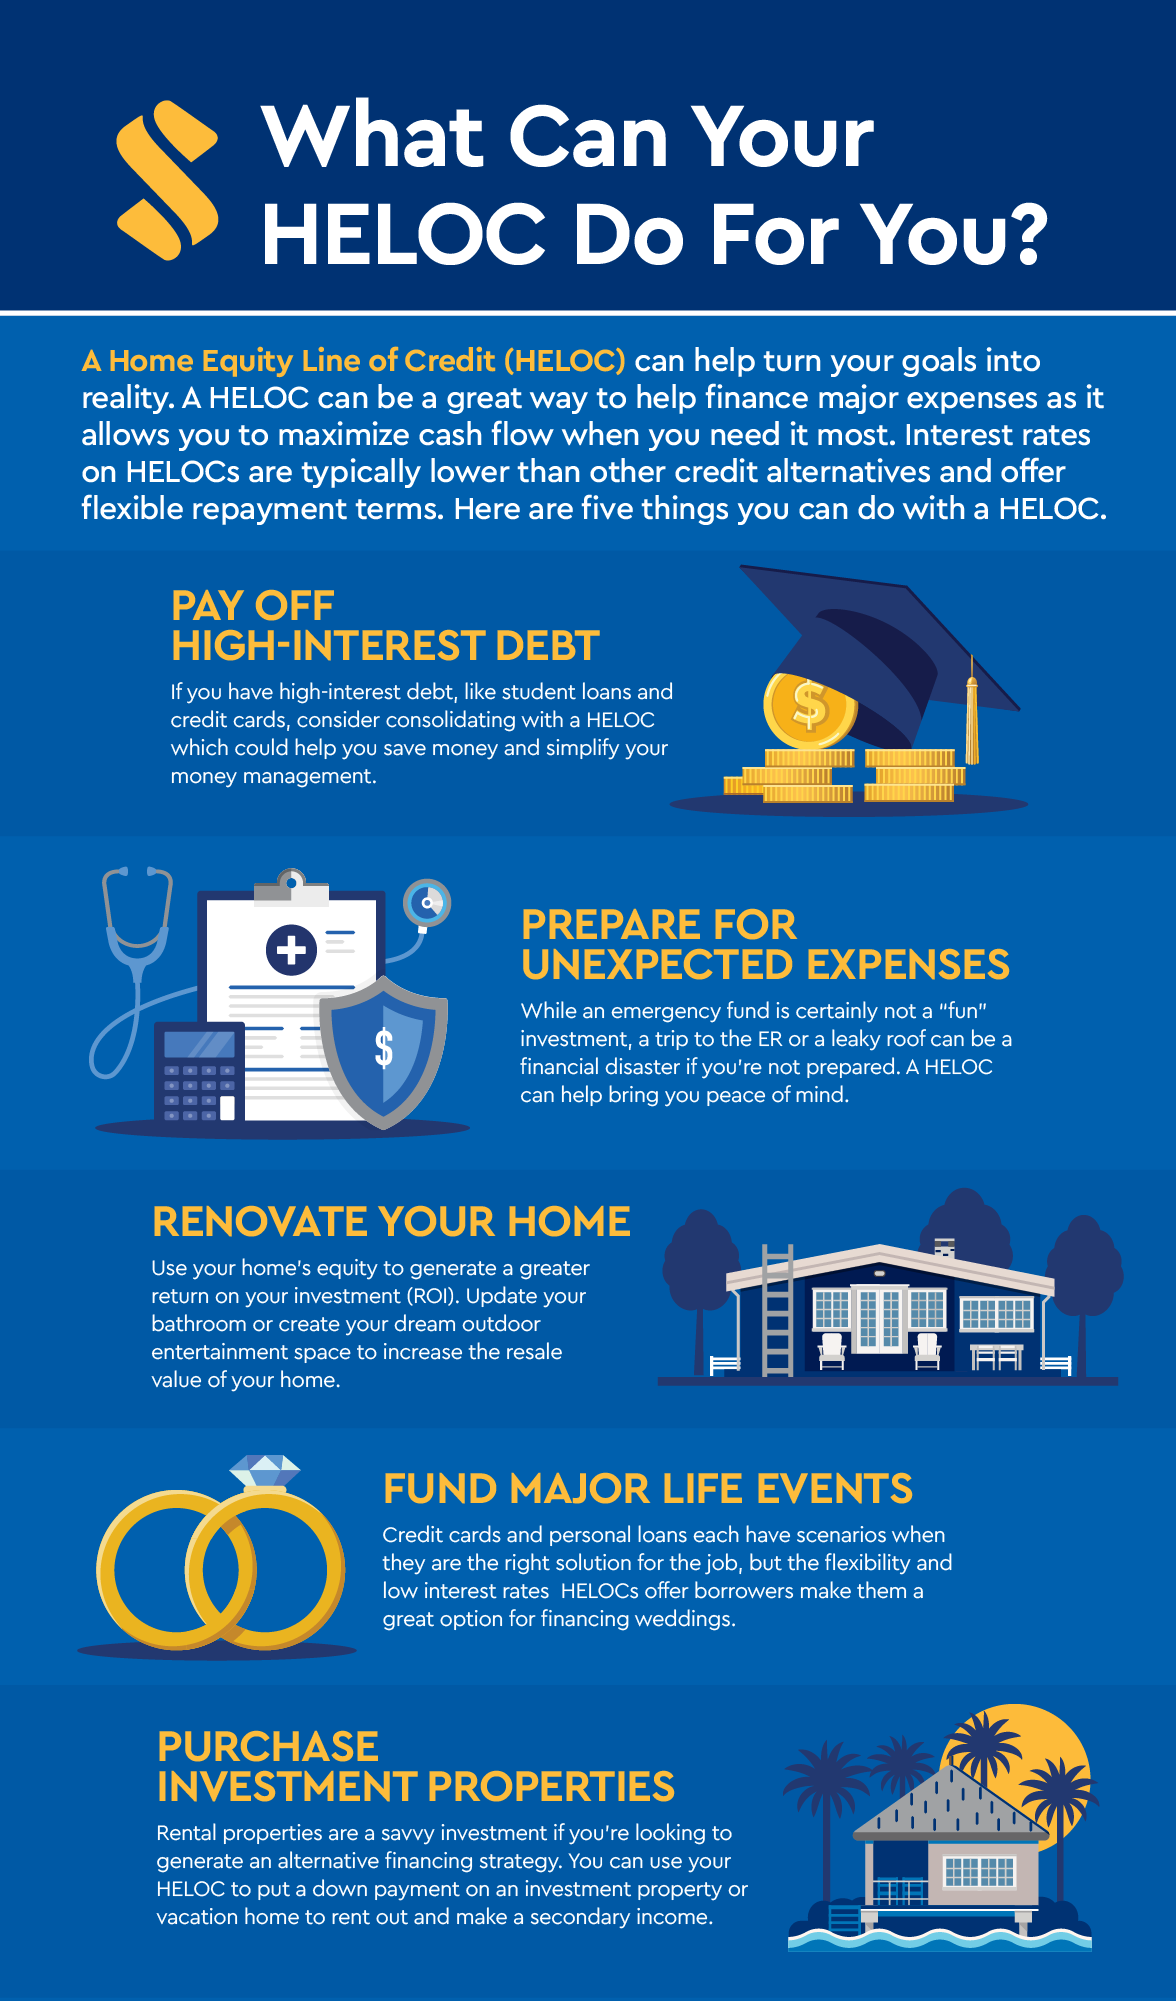 image for What Can Your HELOC Do For You infographic